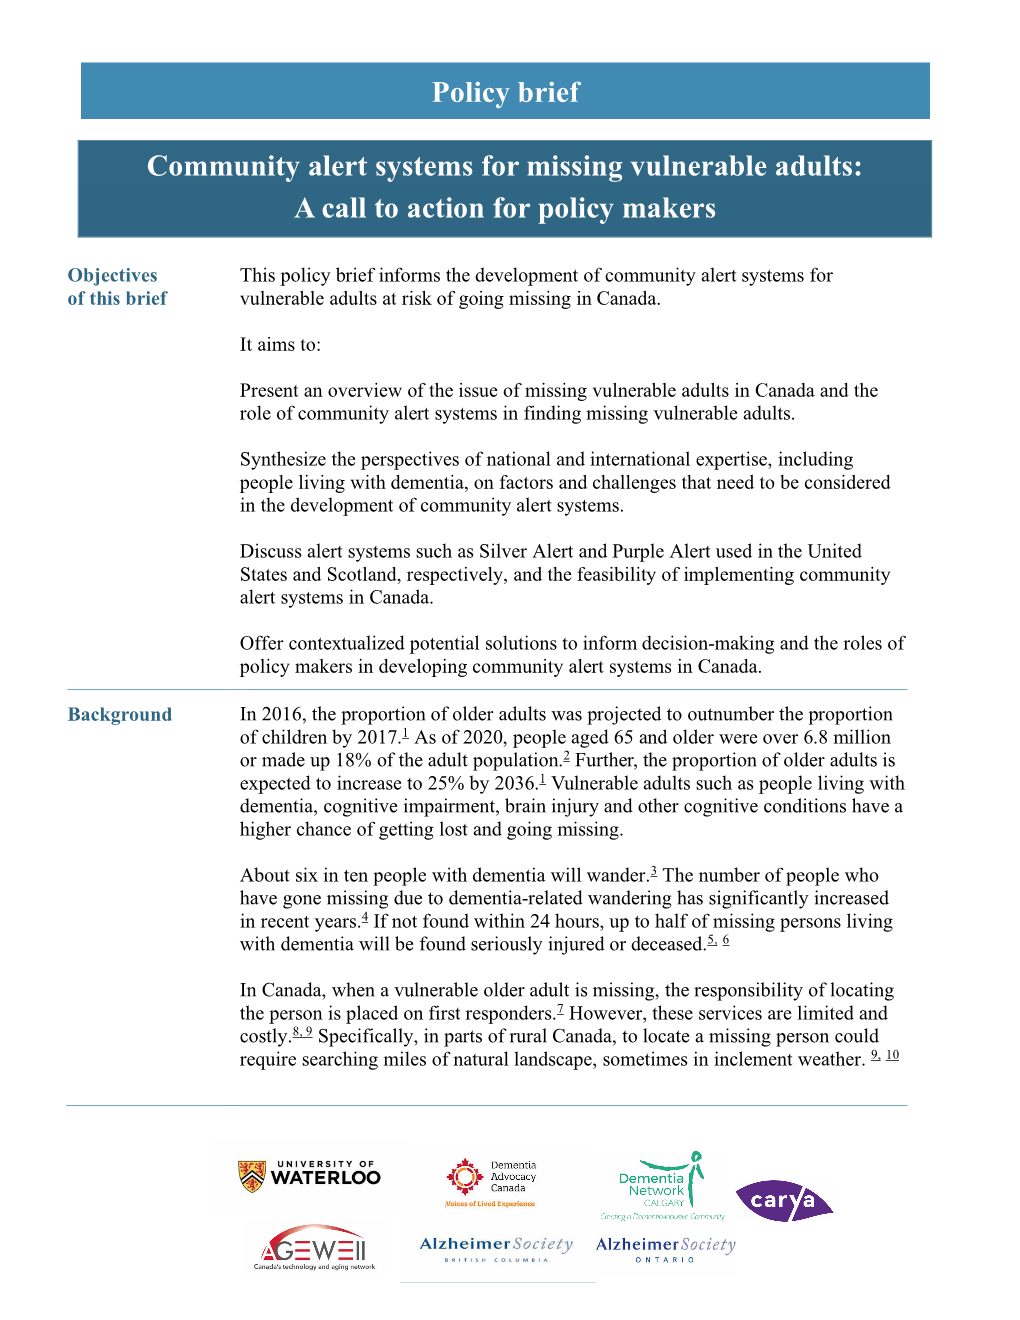 Community Alert Systems for Missing Vulnerable Adults: a Call to Action for Policy Makers